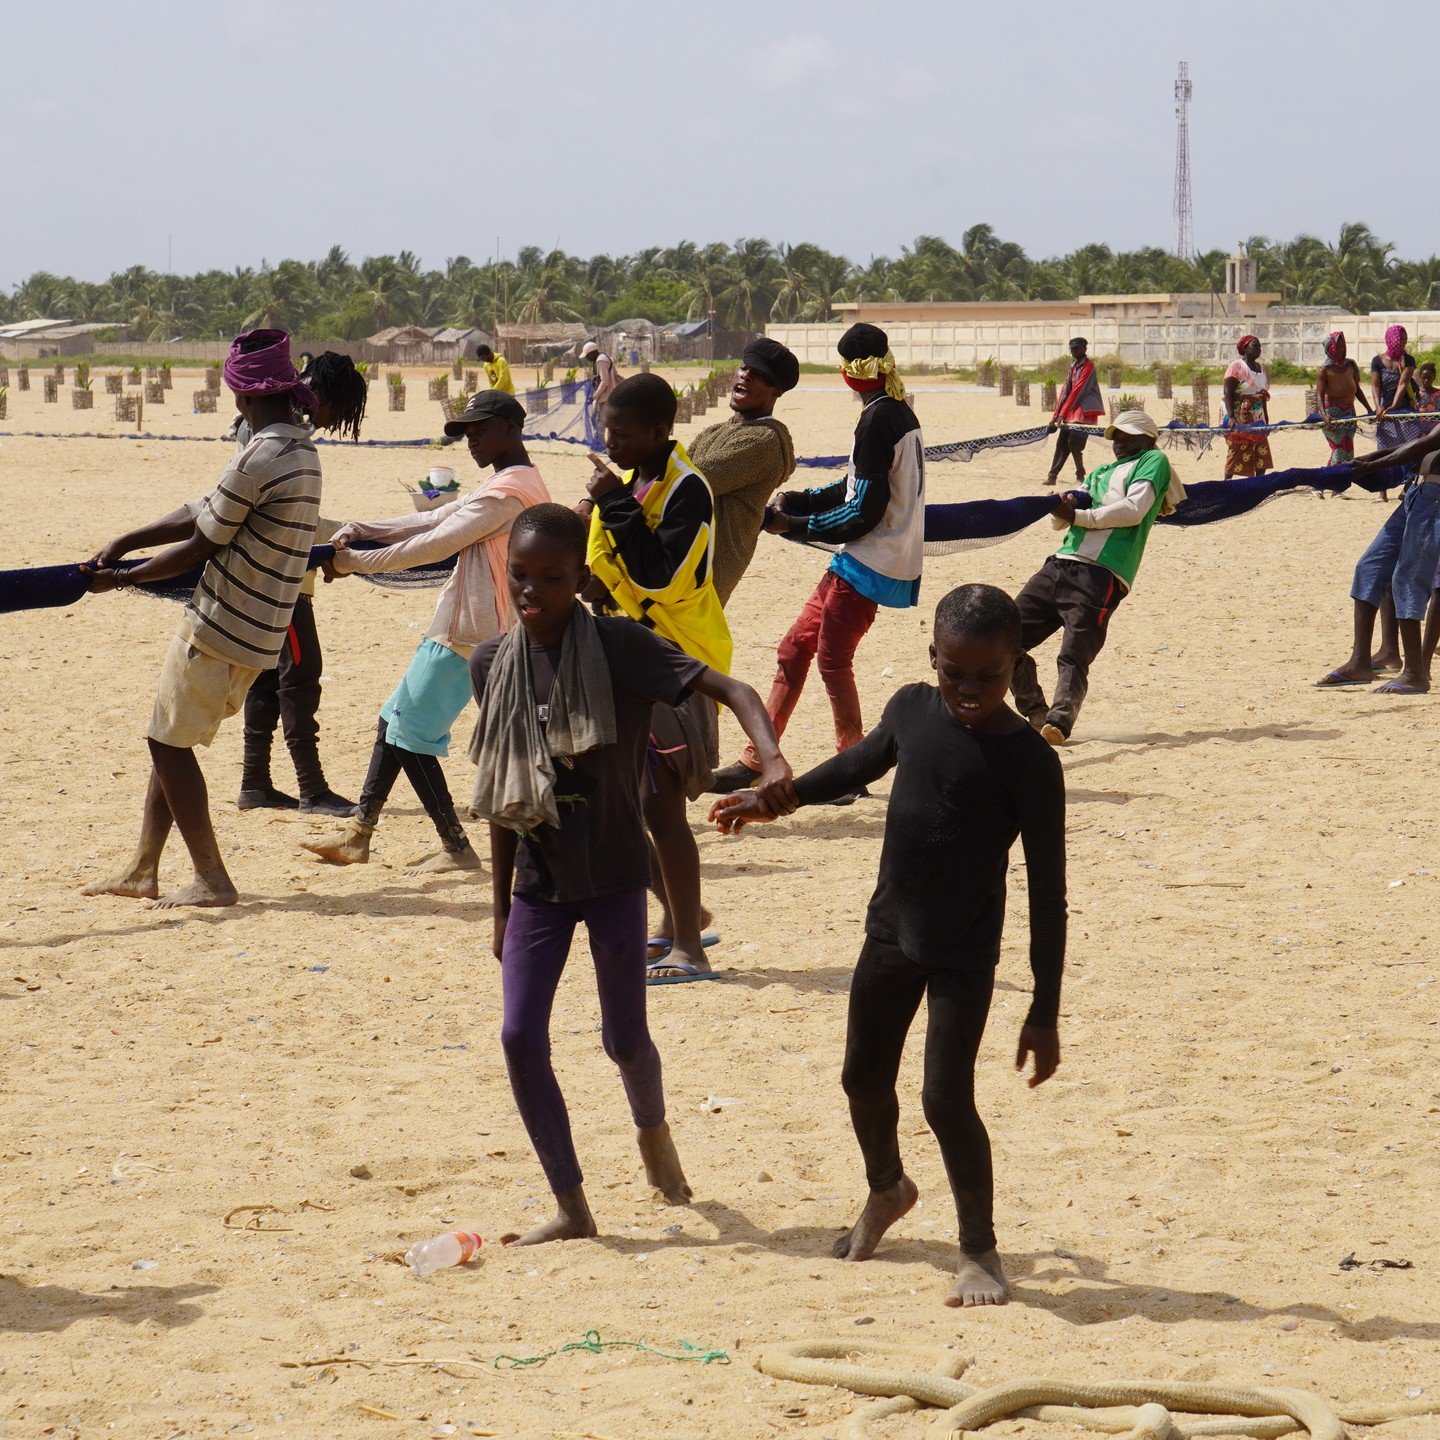 For the first time, several countries in the Gulf of Guinea implemented a closed season for beach seines 

We spent a full day following this fishing community gathering in #Benin 🇧🇯 

Here is a summary of the process with captions for each picture